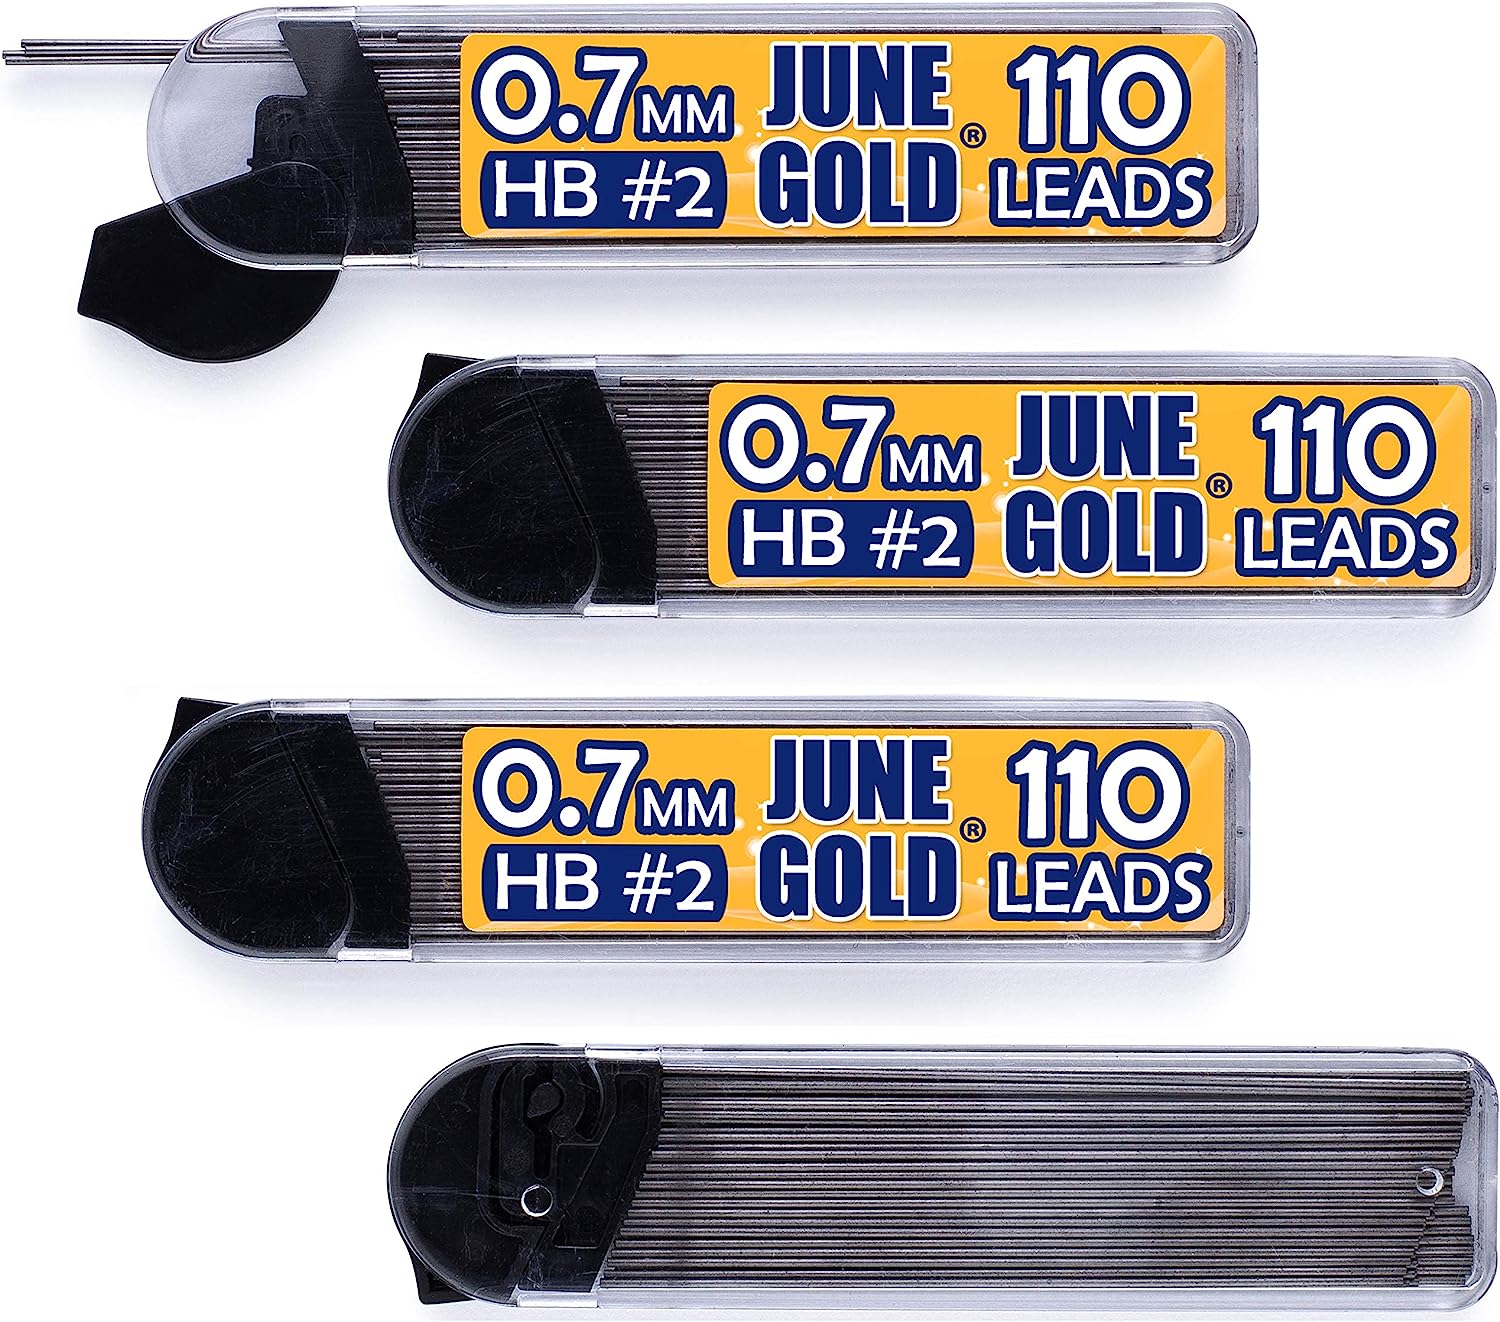 June Gold 440 Pieces, 0.7 mm HB #2 Lead Refills, 110 [...]